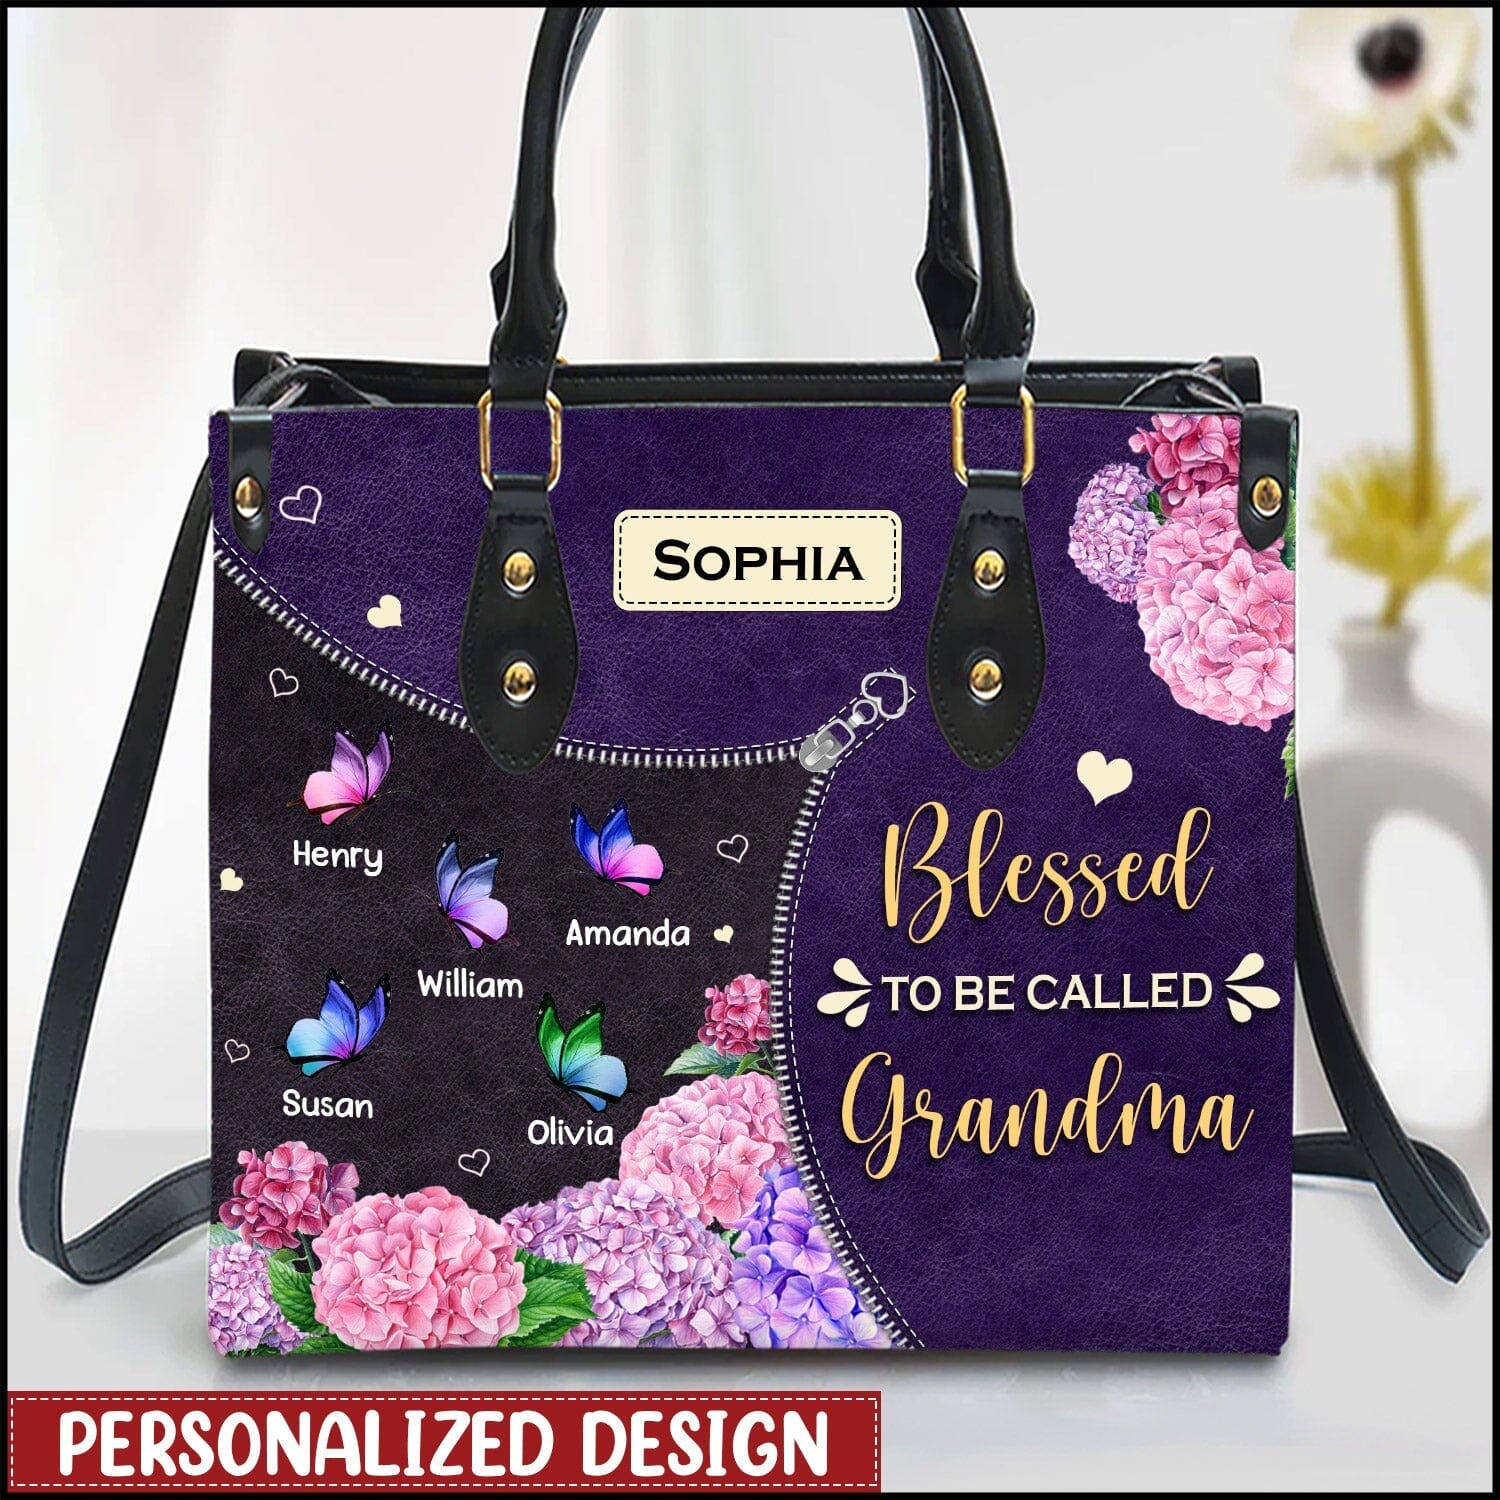 Blessed to be called Grandma Butterfly Floral Personalized Leather Handbag HTN03JUN23CA1 Leather Handbag Humancustom - Unique Personalized Gifts Black 